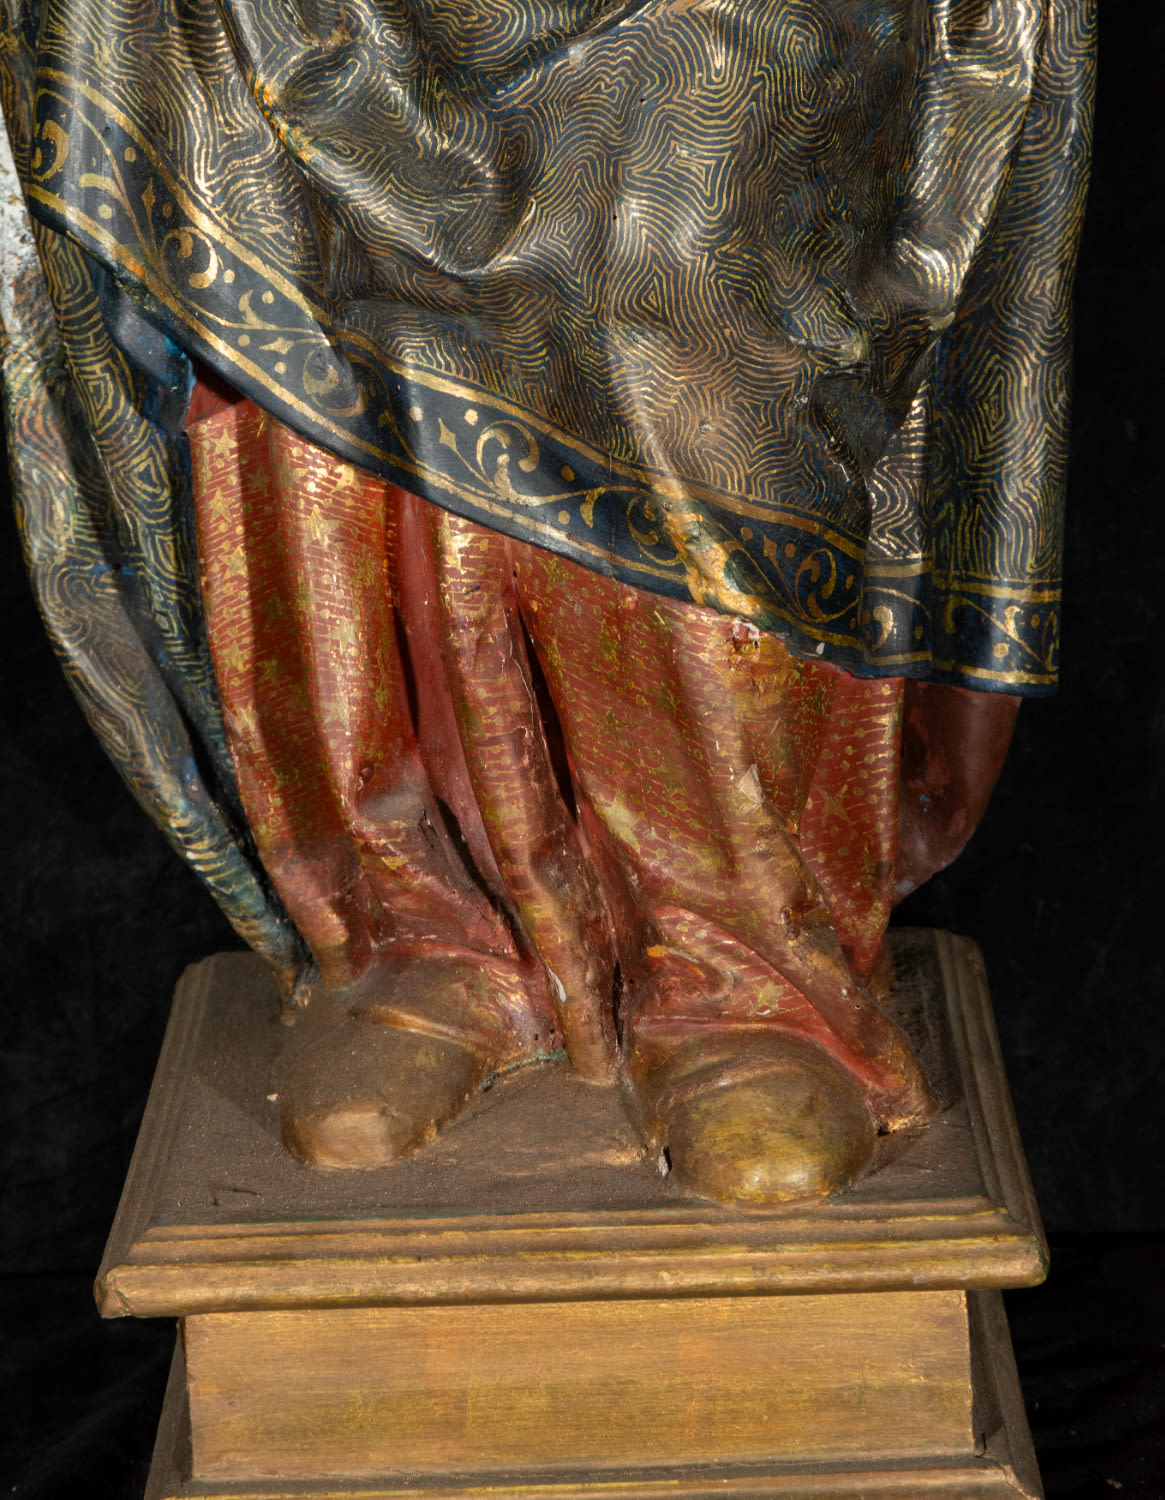 Sculpture of Virgin Mary crowned with the Child Jesus in her arms, 16th century Italian school - Image 4 of 8